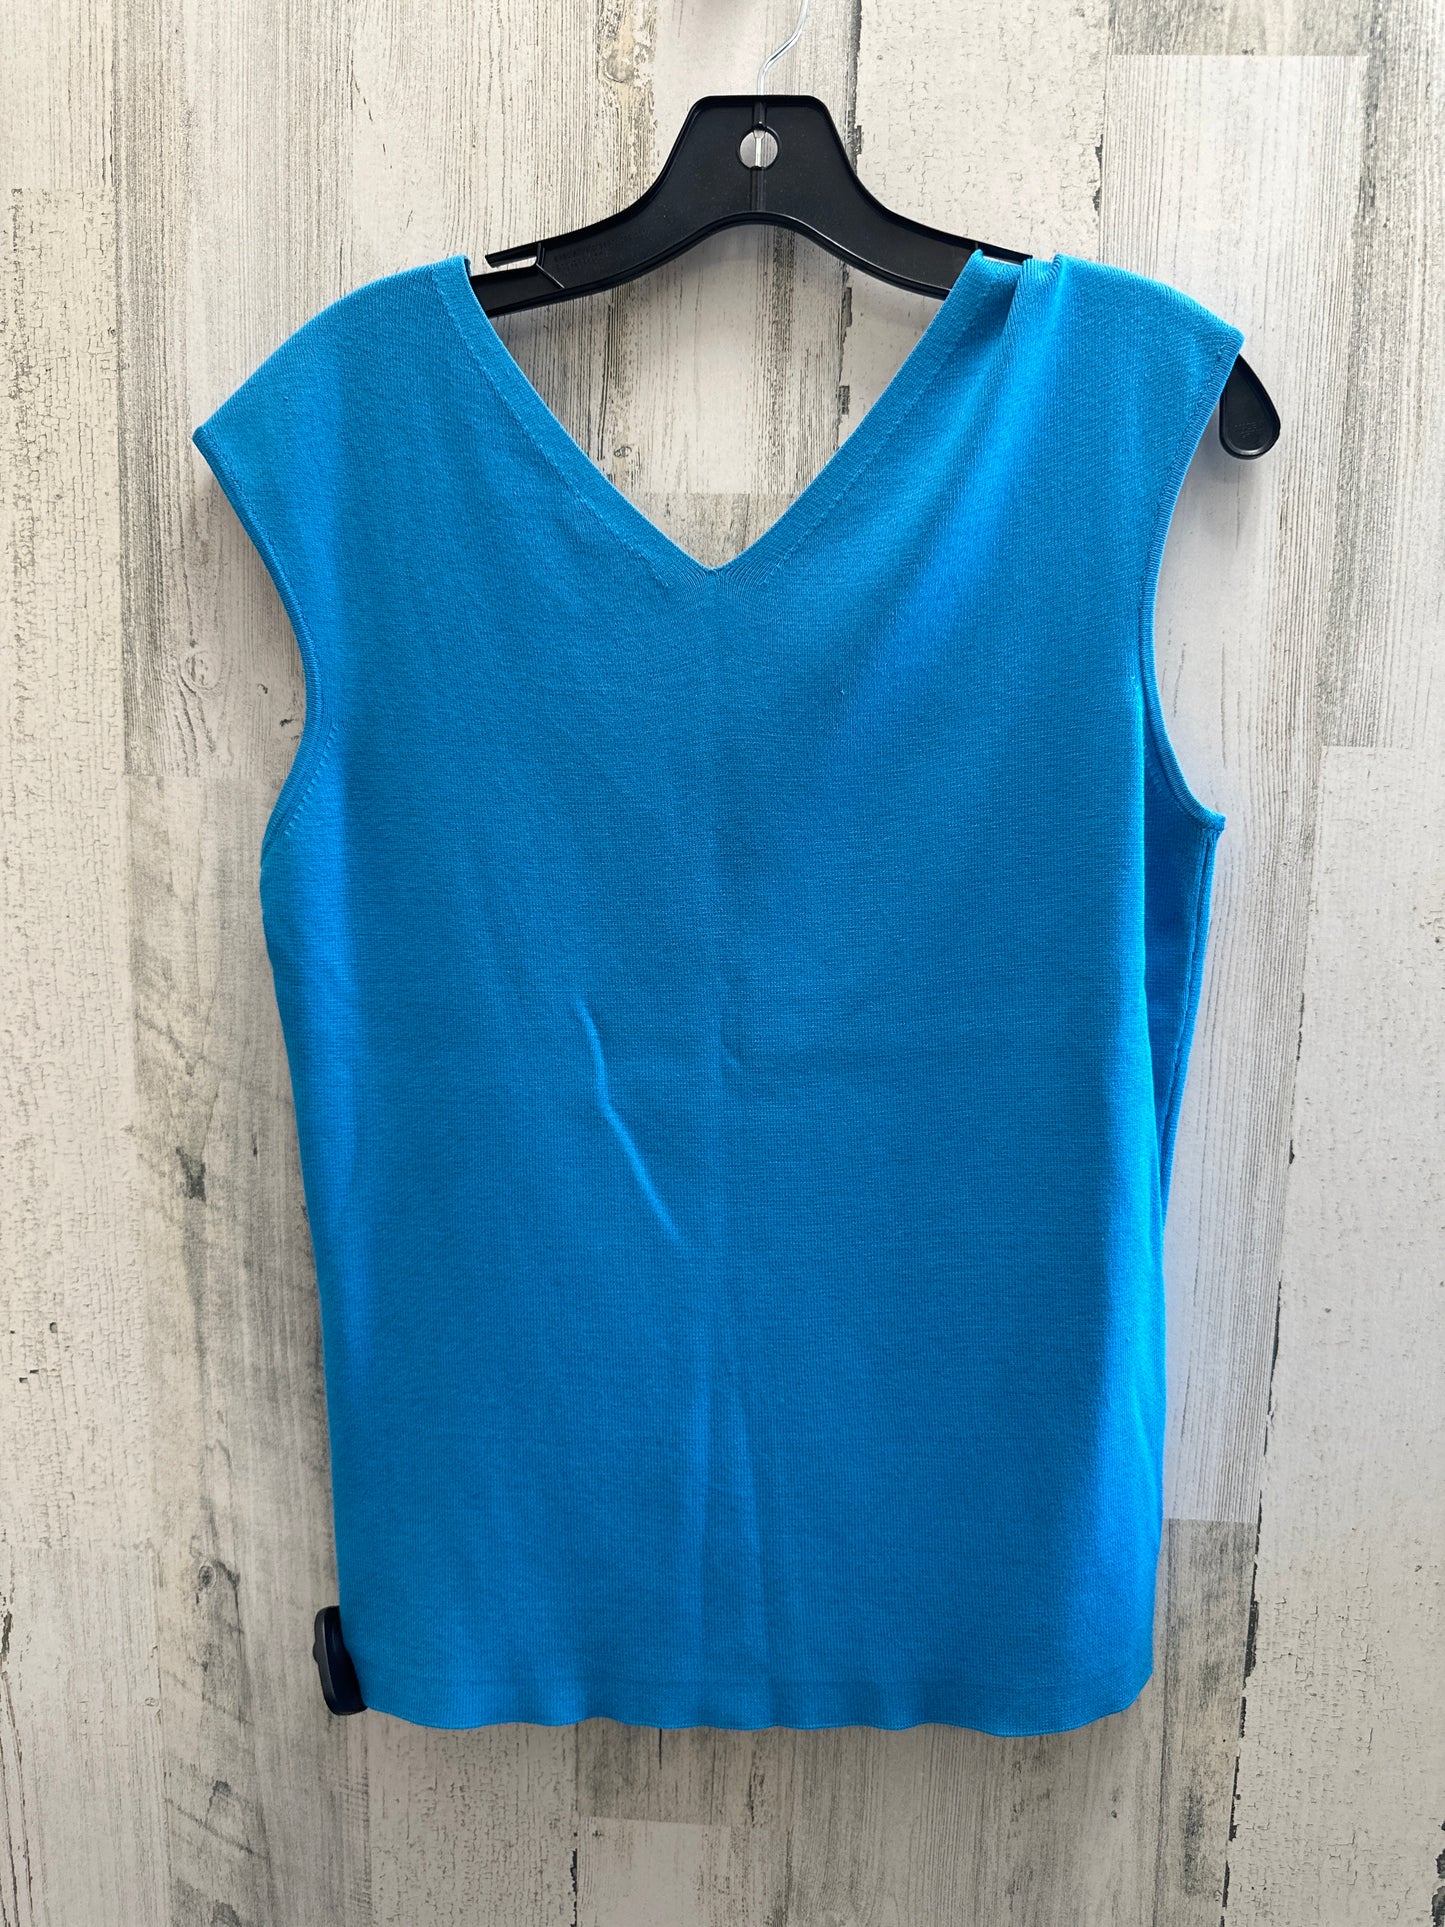 Top Sleeveless By Ann Taylor  Size: L